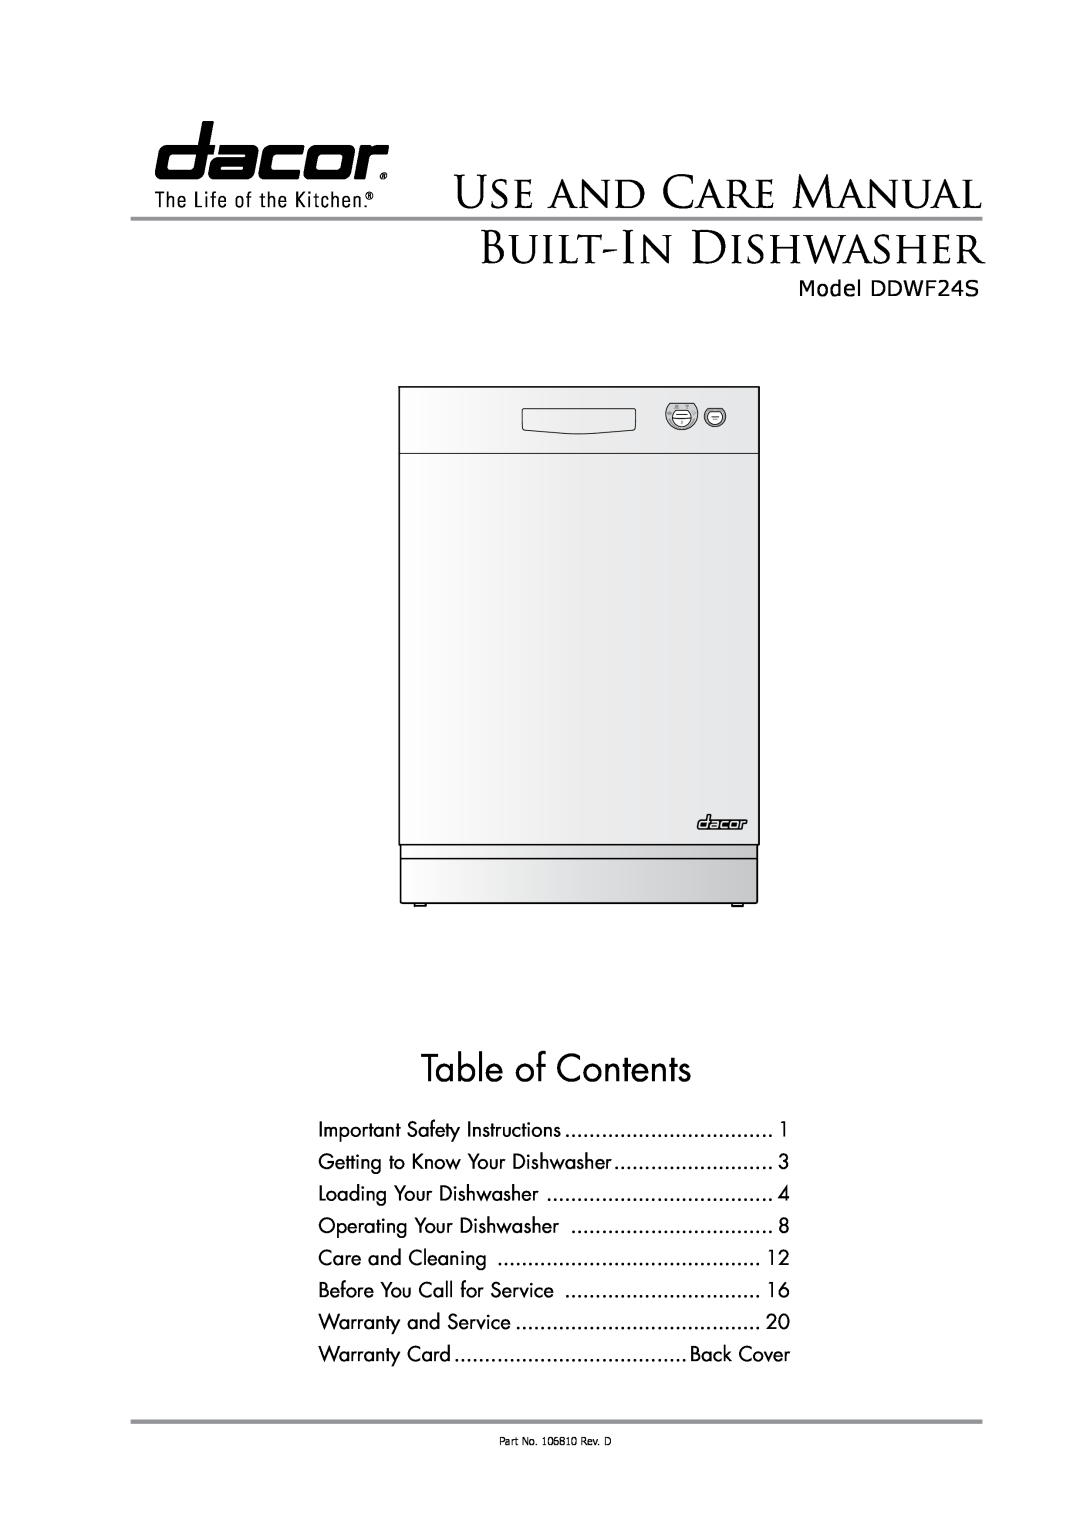 Dacor DDWF24S important safety instructions Warranty Card, Use And Care Manual Built-In Dishwasher, Table of Contents 